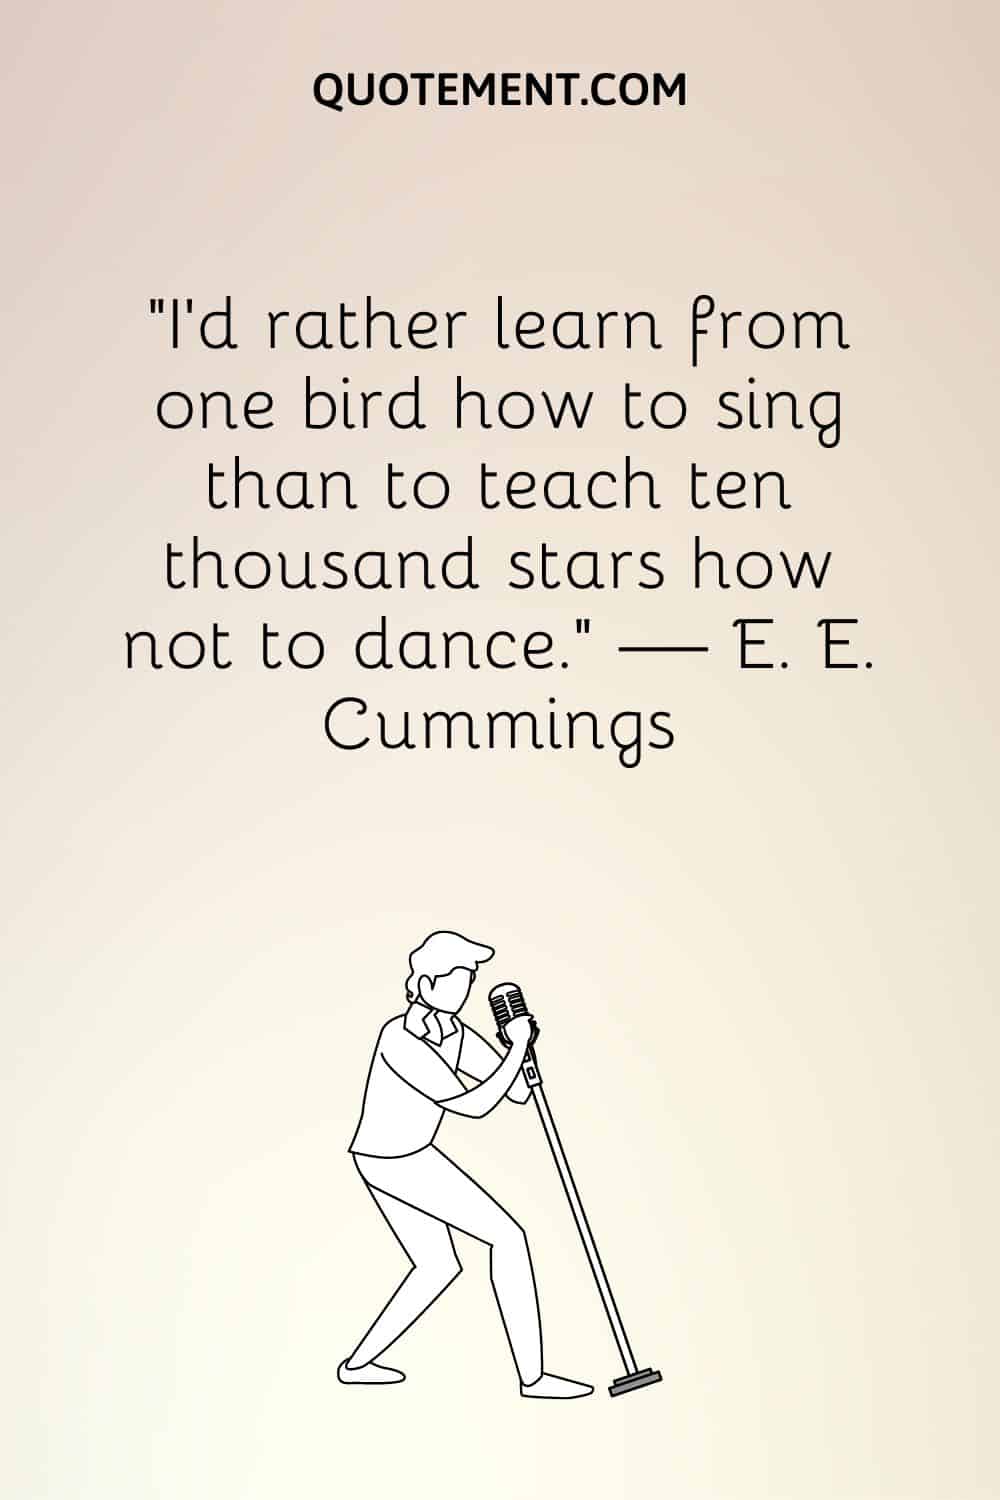 “I'd rather learn from one bird how to sing than to teach ten thousand stars how not to dance.” — E. E. Cummings